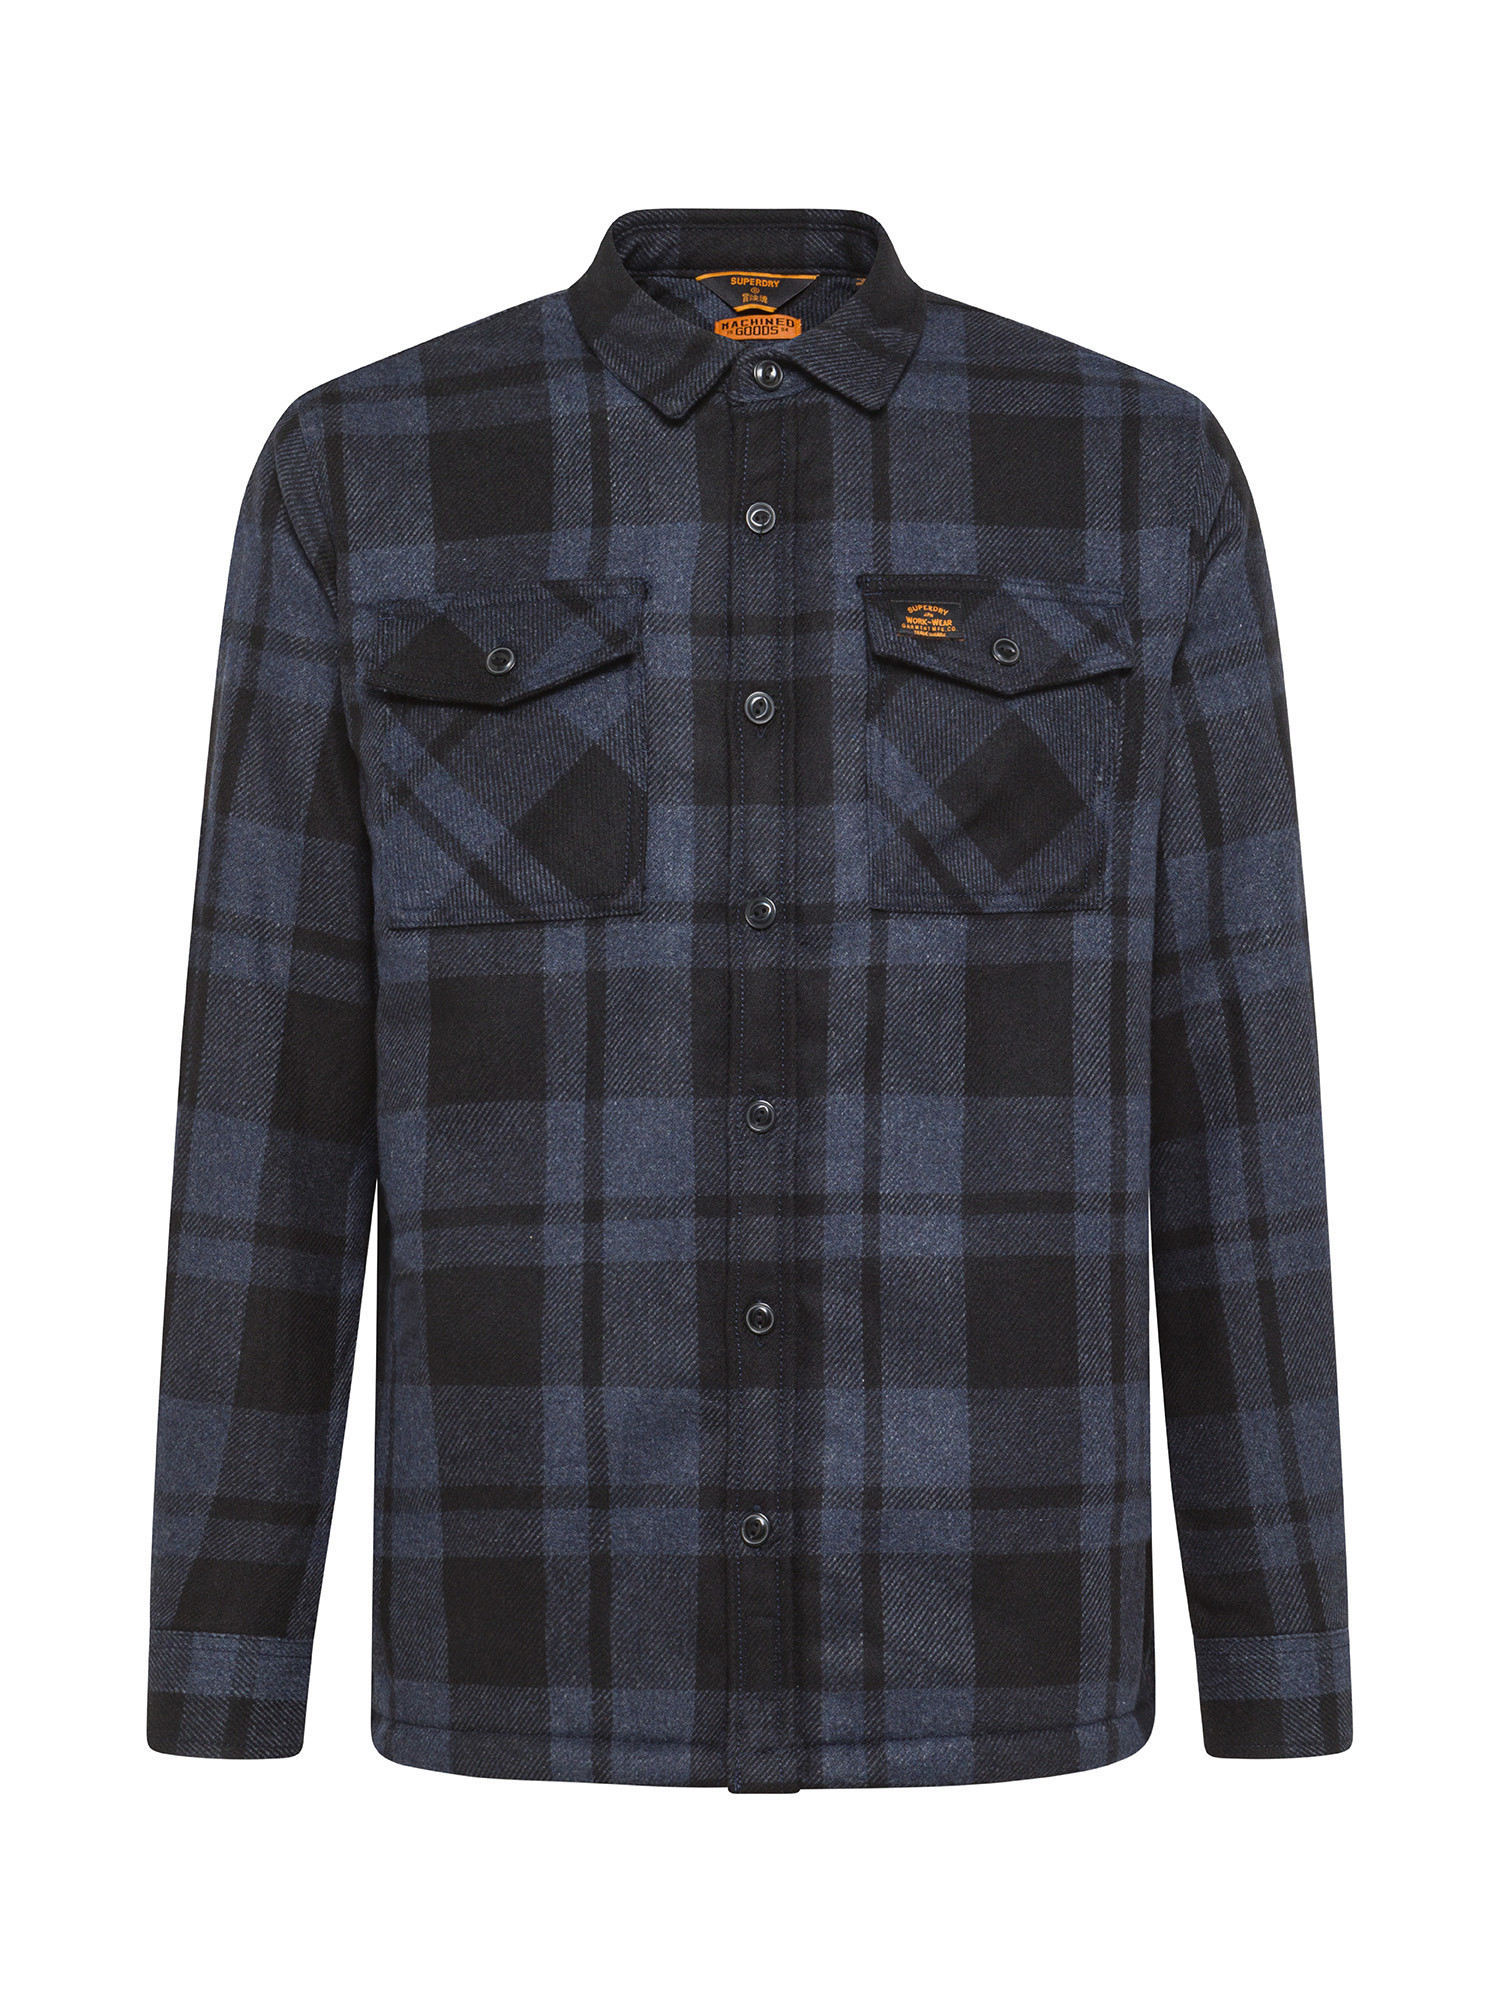 Superdry - Sherpa lined shirt, Anthracite, large image number 0